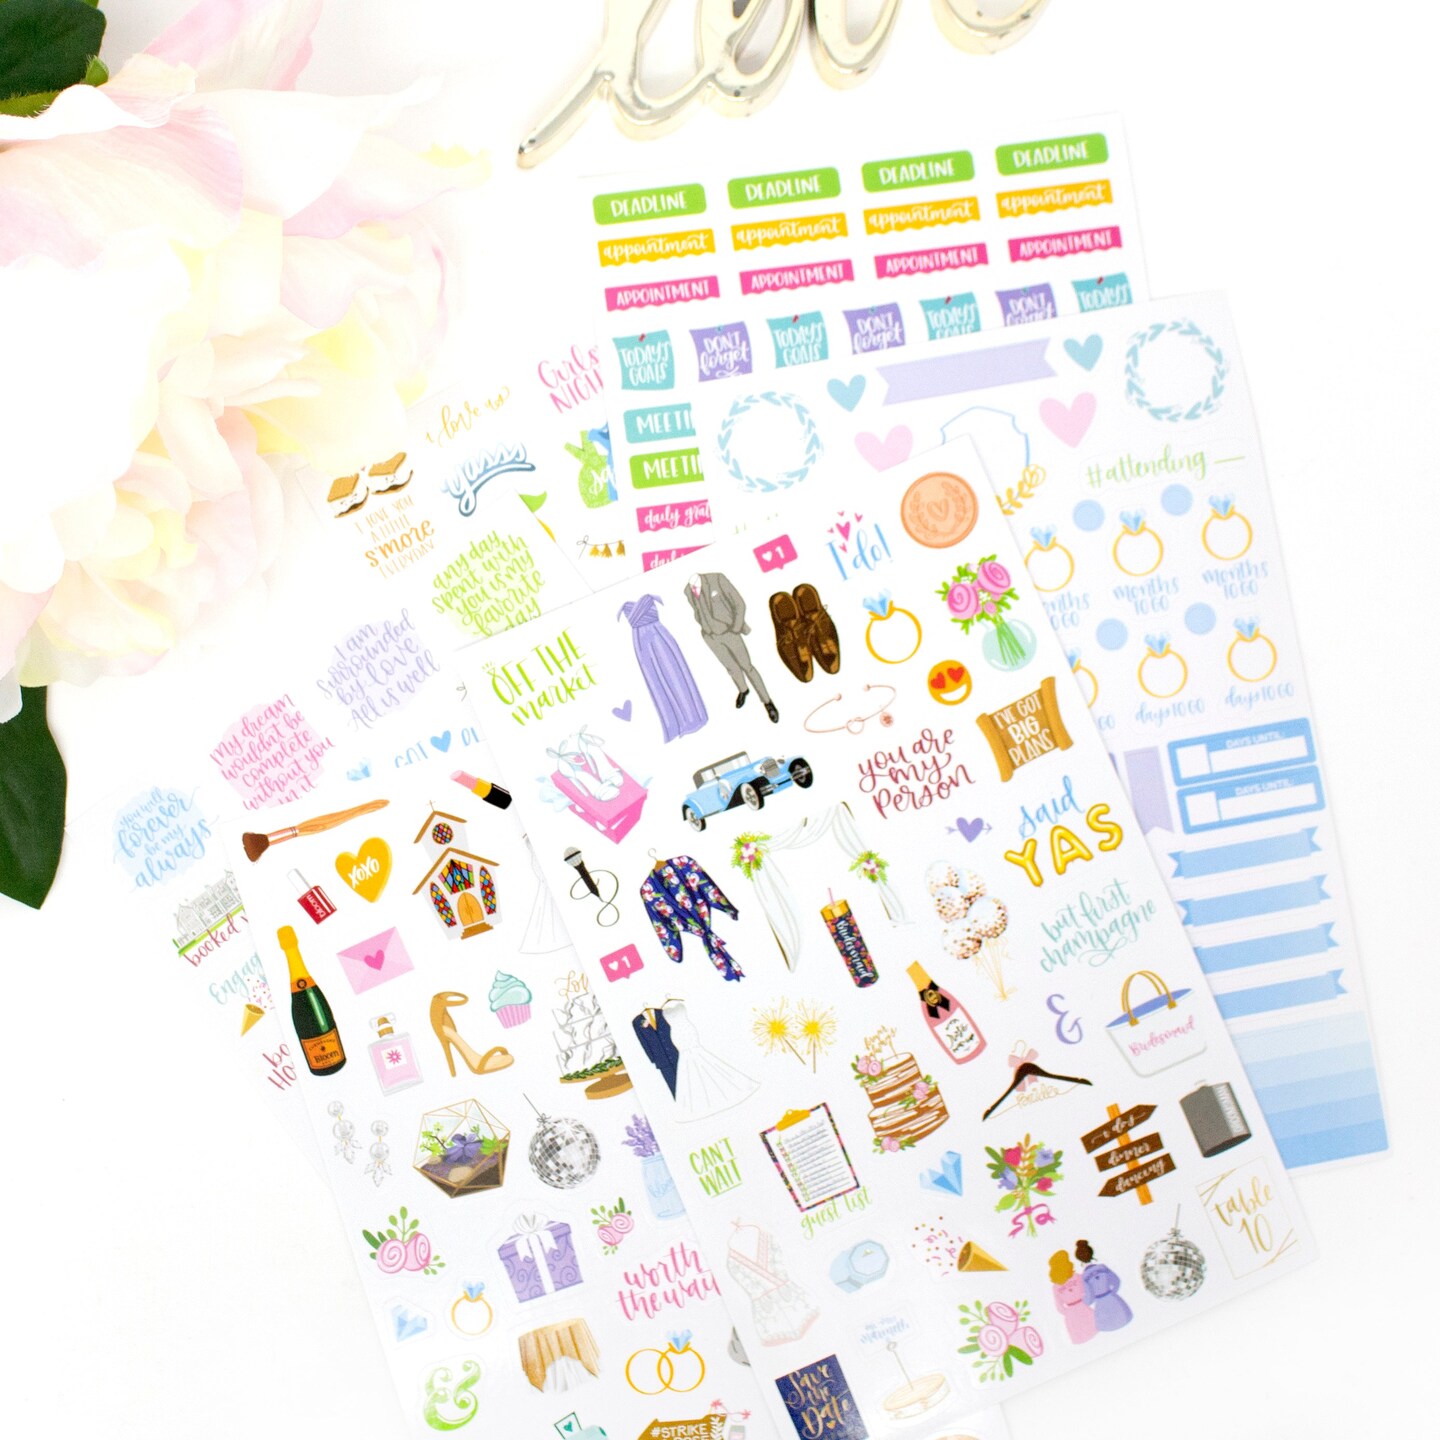 bloom daily planners Sticker Sheets, Wedding Planning Stickers V2